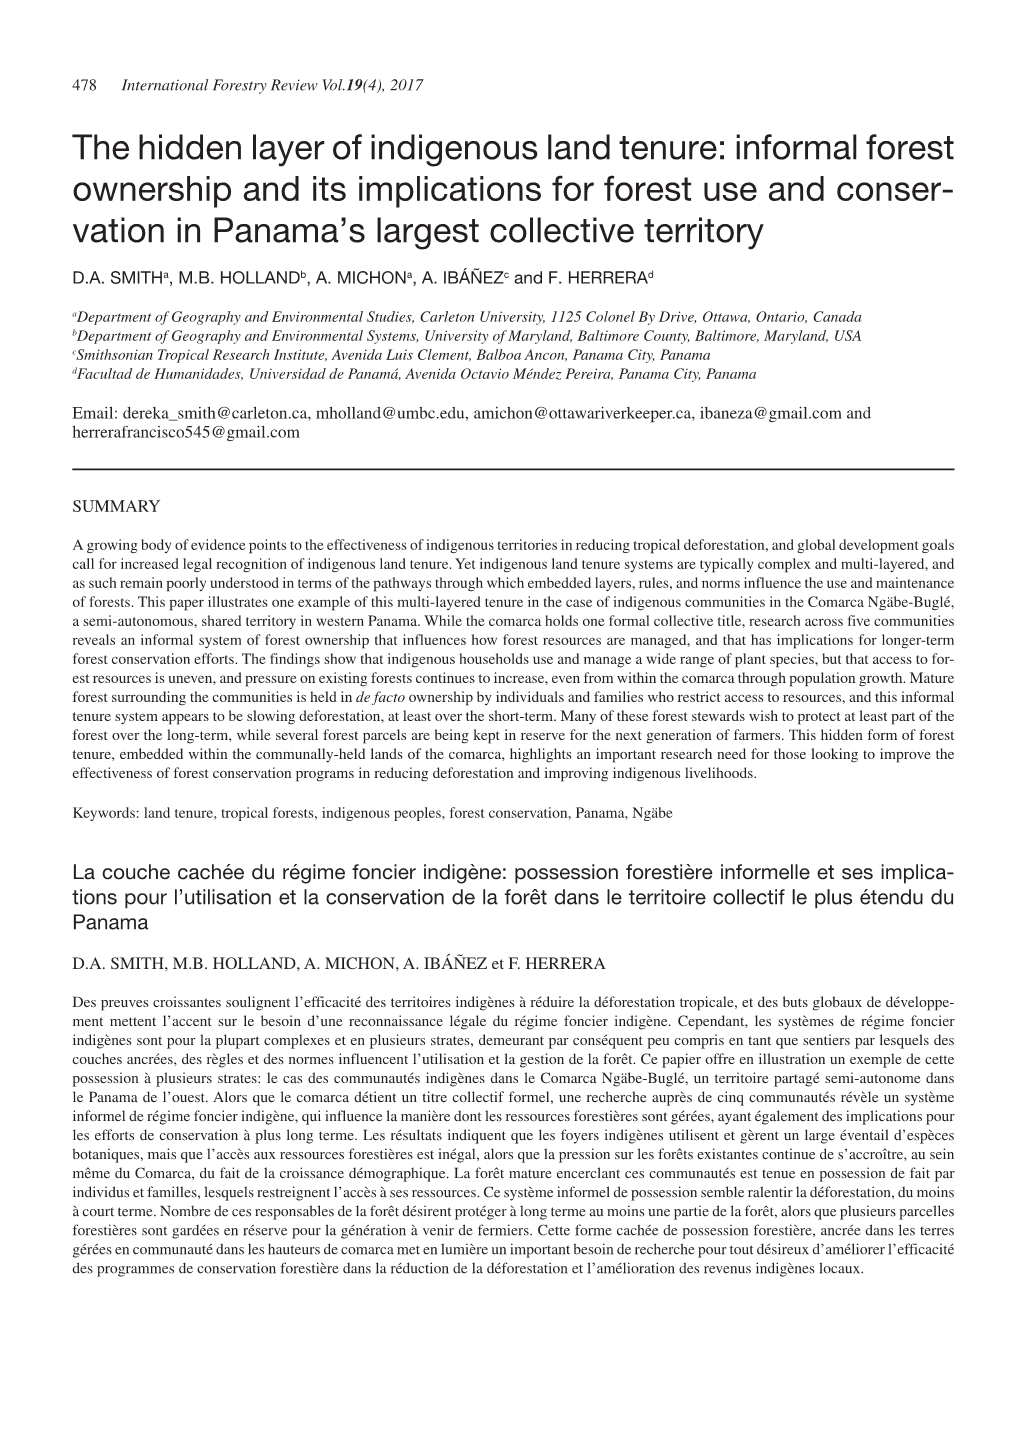 The Hidden Layer of Indigenous Land Tenure: Informal Forest Ownership and Its Implications for Forest Use and Conser- Vation in Panama’S Largest Collective Territory